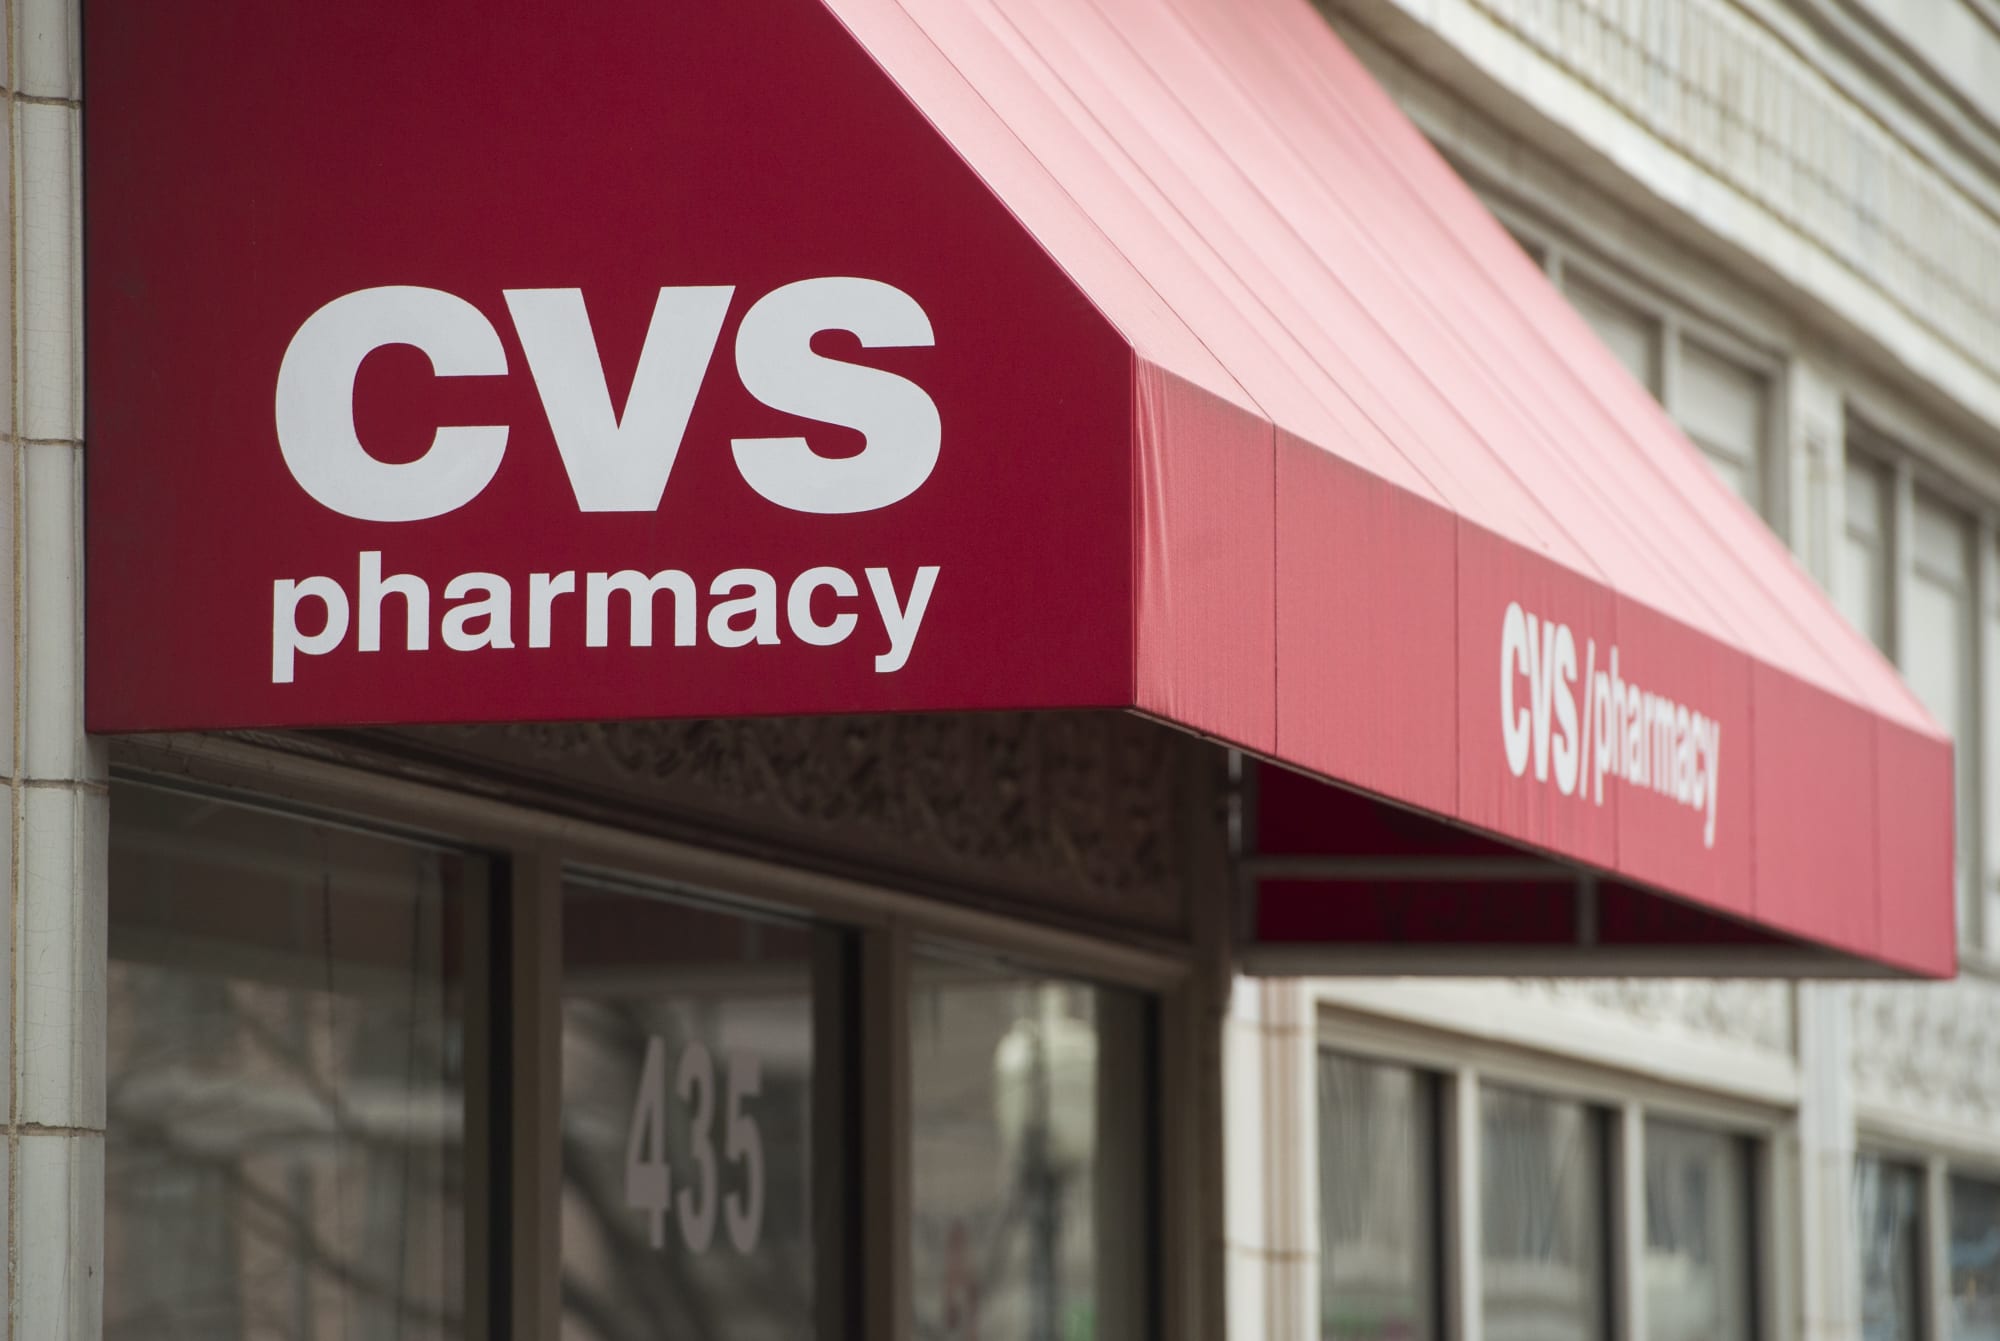 Is CVS Pharmacy and the Minute Clinic open on Memorial Day 2017?